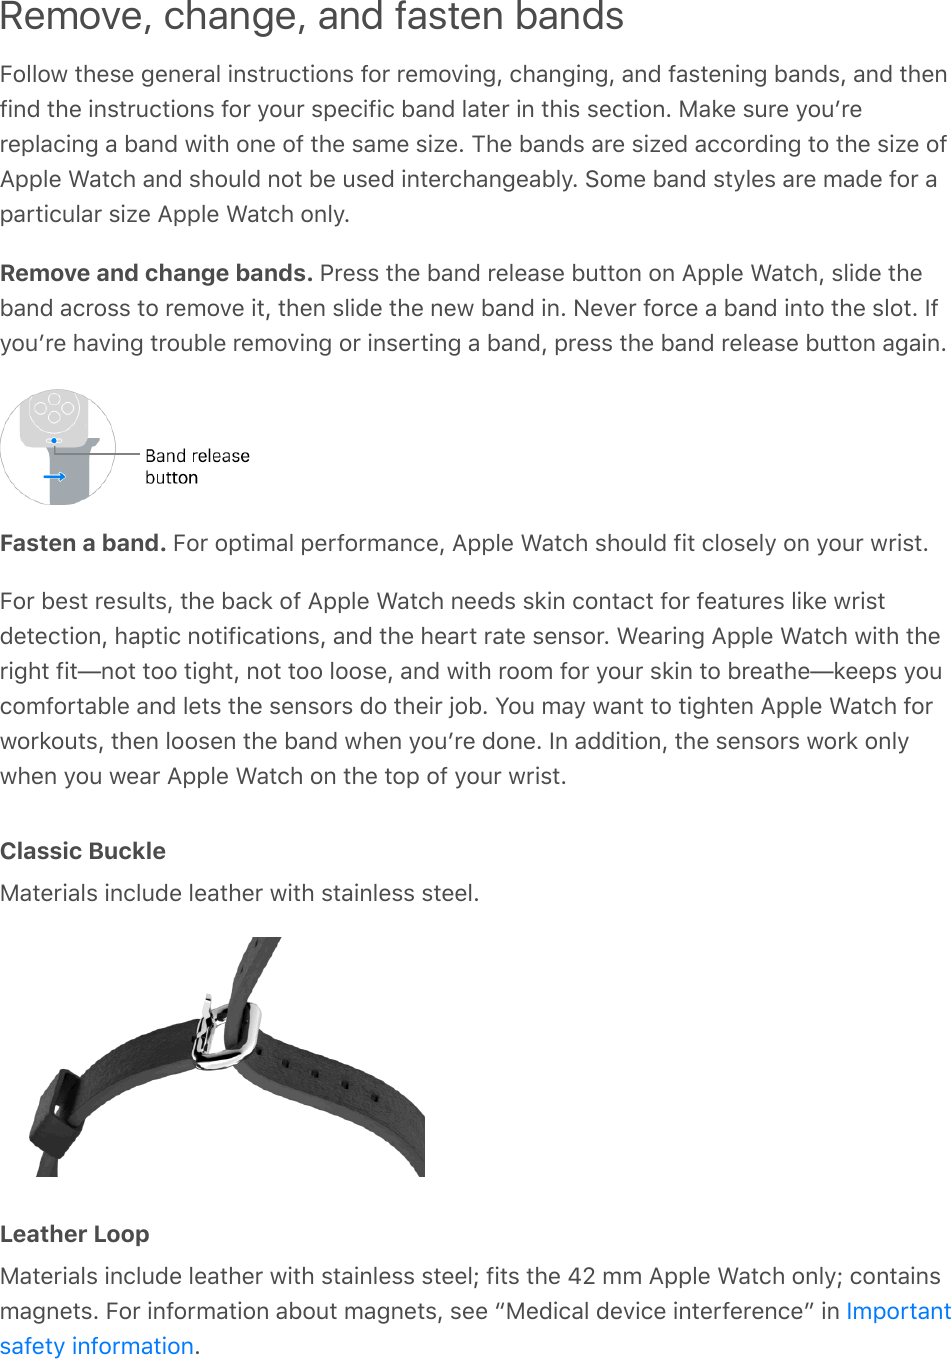 Remove, change, and fasten bandsFollow these general instructions for removing, changing, and fastening bands, and thenfind the instructions for your specific band later in this section. Make sure youʼrereplacing a band with one of the same size. The bands are sized according to the size ofApple Watch and should not be used interchangeably. Some band styles are made for aparticular size Apple Watch only.Remove and change bands. Press the band release button on Apple Watch, slide theband across to remove it, then slide the new band in. Never force a band into the slot. Ifyouʼre having trouble removing or inserting a band, press the band release button again.Fasten a band. For optimal performance, Apple Watch should fit closely on your wrist.For best results, the back of Apple Watch needs skin contact for features like wristdetection, haptic notifications, and the heart rate sensor. Wearing Apple Watch with theright fit—not too tight, not too loose, and with room for your skin to breathe—keeps youcomfortable and lets the sensors do their job. You may want to tighten Apple Watch forworkouts, then loosen the band when youʼre done. In addition, the sensors work onlywhen you wear Apple Watch on the top of your wrist.Classic BuckleMaterials include leather with stainless steel.Leather LoopMaterials include leather with stainless steel; fits the 42 mm Apple Watch only; containsmagnets. For information about magnets, see “Medical device interference” in .Importantsafety information